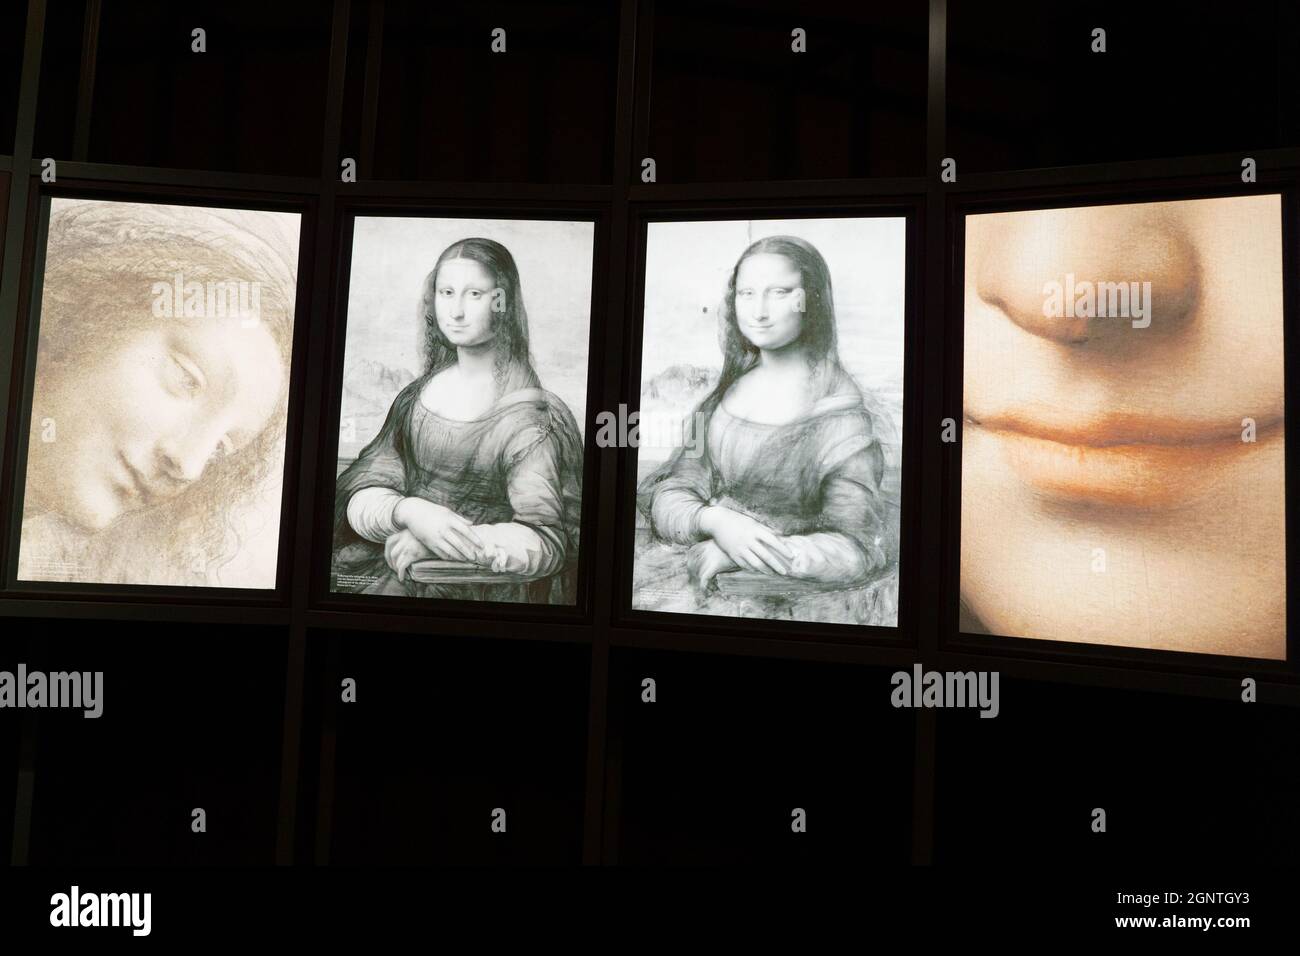 Paintings of Mona Lisa seen during the Presentation of the Exhibition of Leonardo Da Vinci at the Museo Nacional del Prado.The Museo Nacional del Prado is presenting the latest research on Leonardo's closest circle, Leonardo and the copy of the Mona Lisa. New approaches to the artist's studio practices is the first monographic exhibition in Spain to study the copies and versions made in Leonardo's studio during his lifetime, works that were based on the master's prototypes and authorized by him. On display at the Museo Nacional del Prado until 23 January in Room D of the Jerónimos Building, th Stock Photo